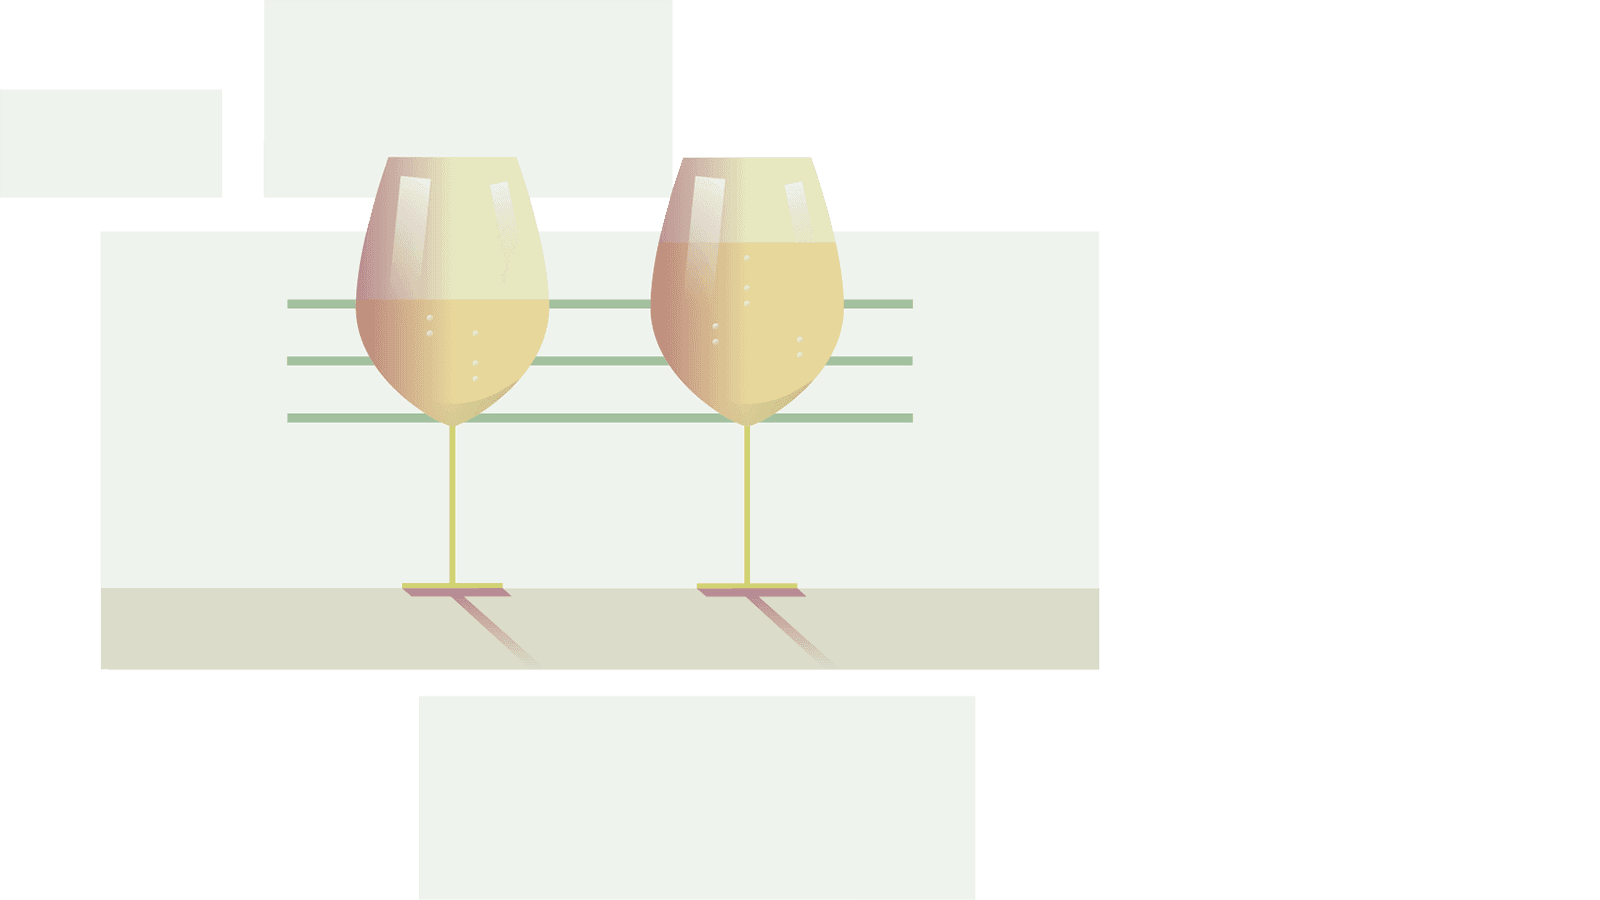 Graphic image of two wine glasses. One with a small wine serving and the other with a large wine serving.